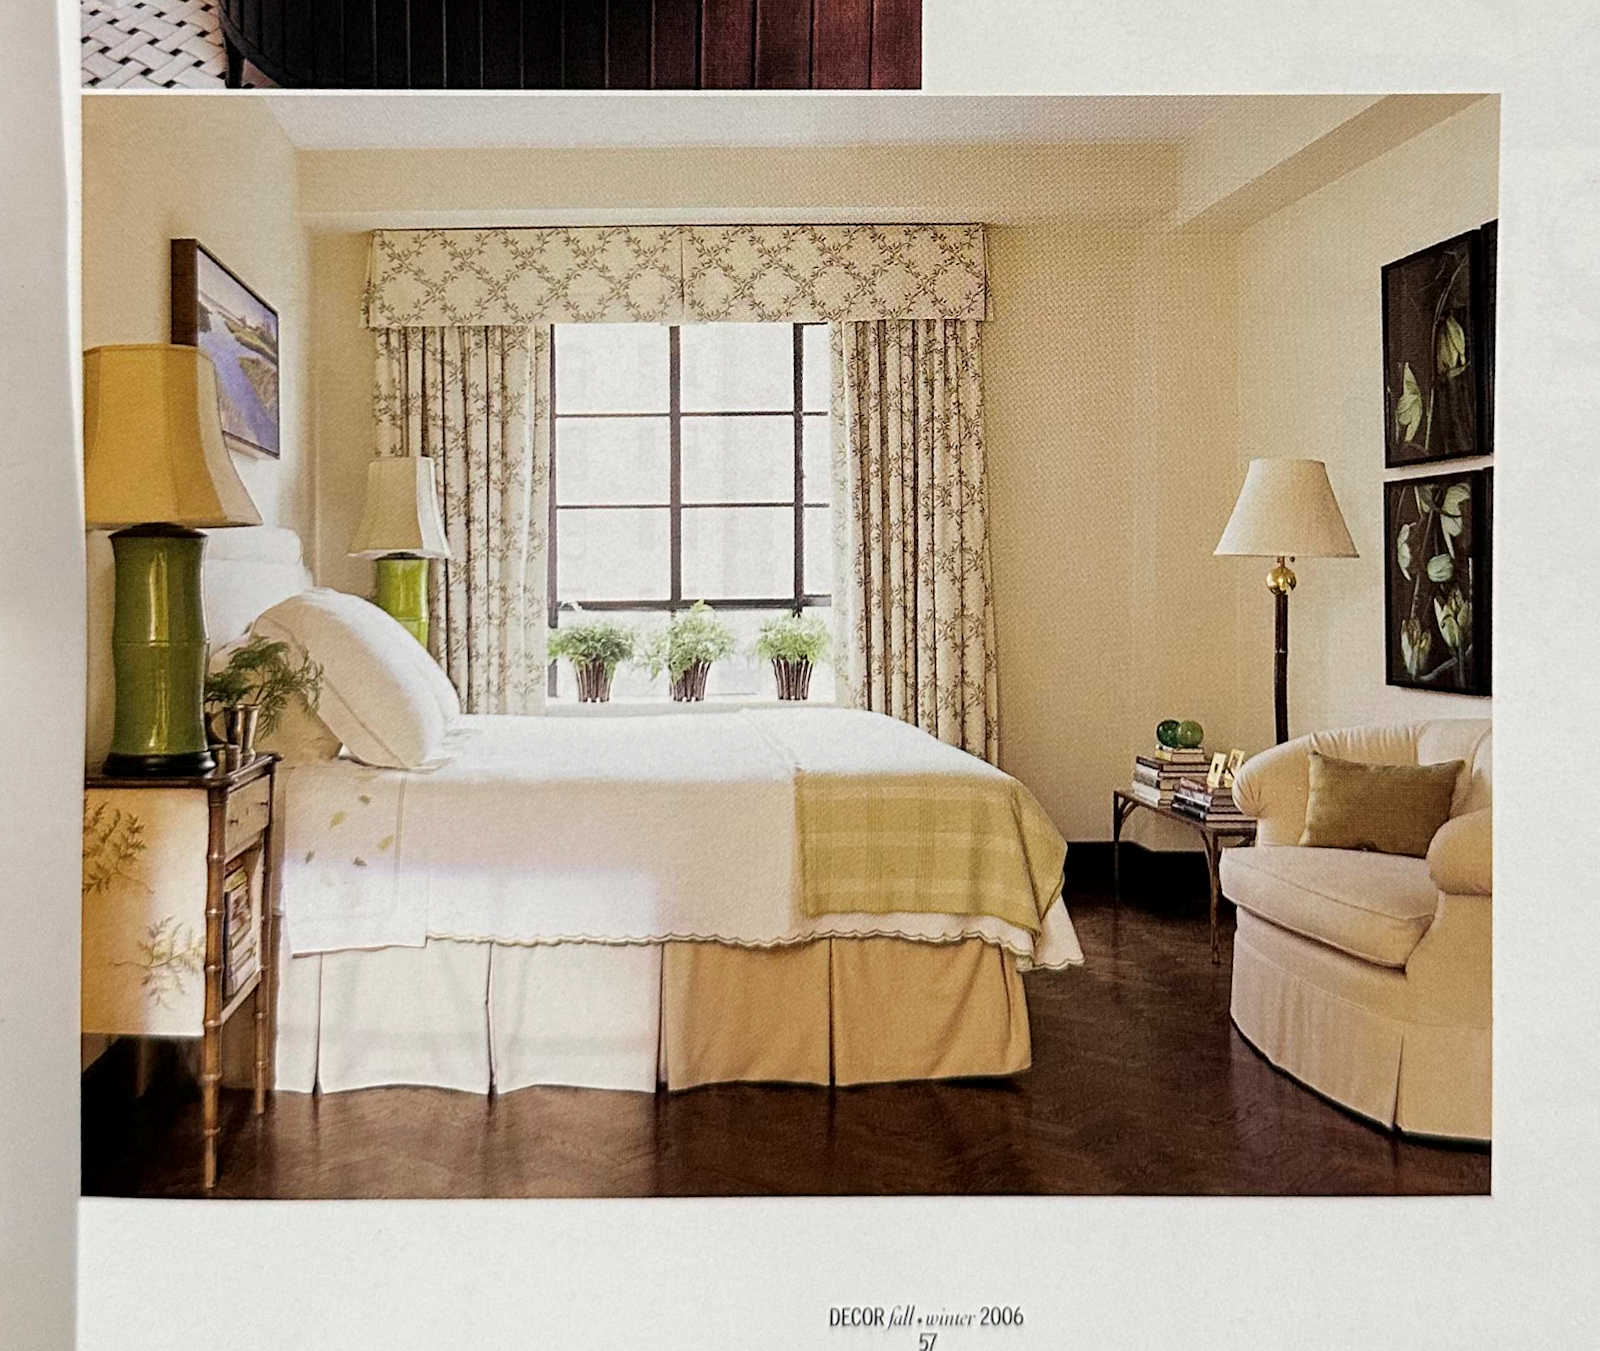 Neutral bedroom design with dark wood floors from 2006. Is this timeless bedroom design?